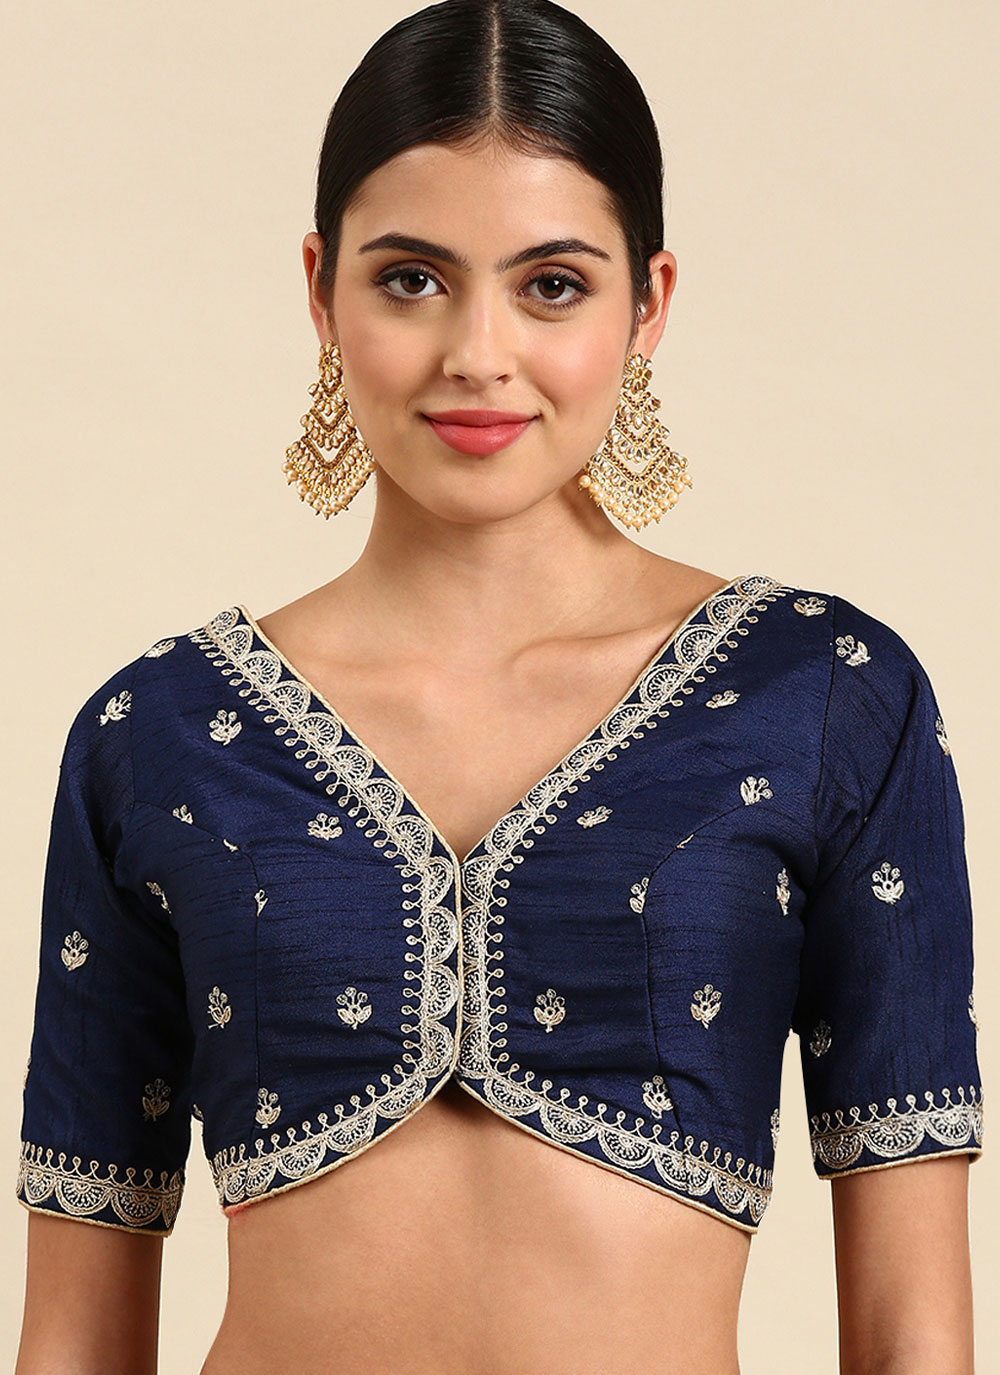  Banglori Silk Traditional Embroidered Back Designs Women Blouse /